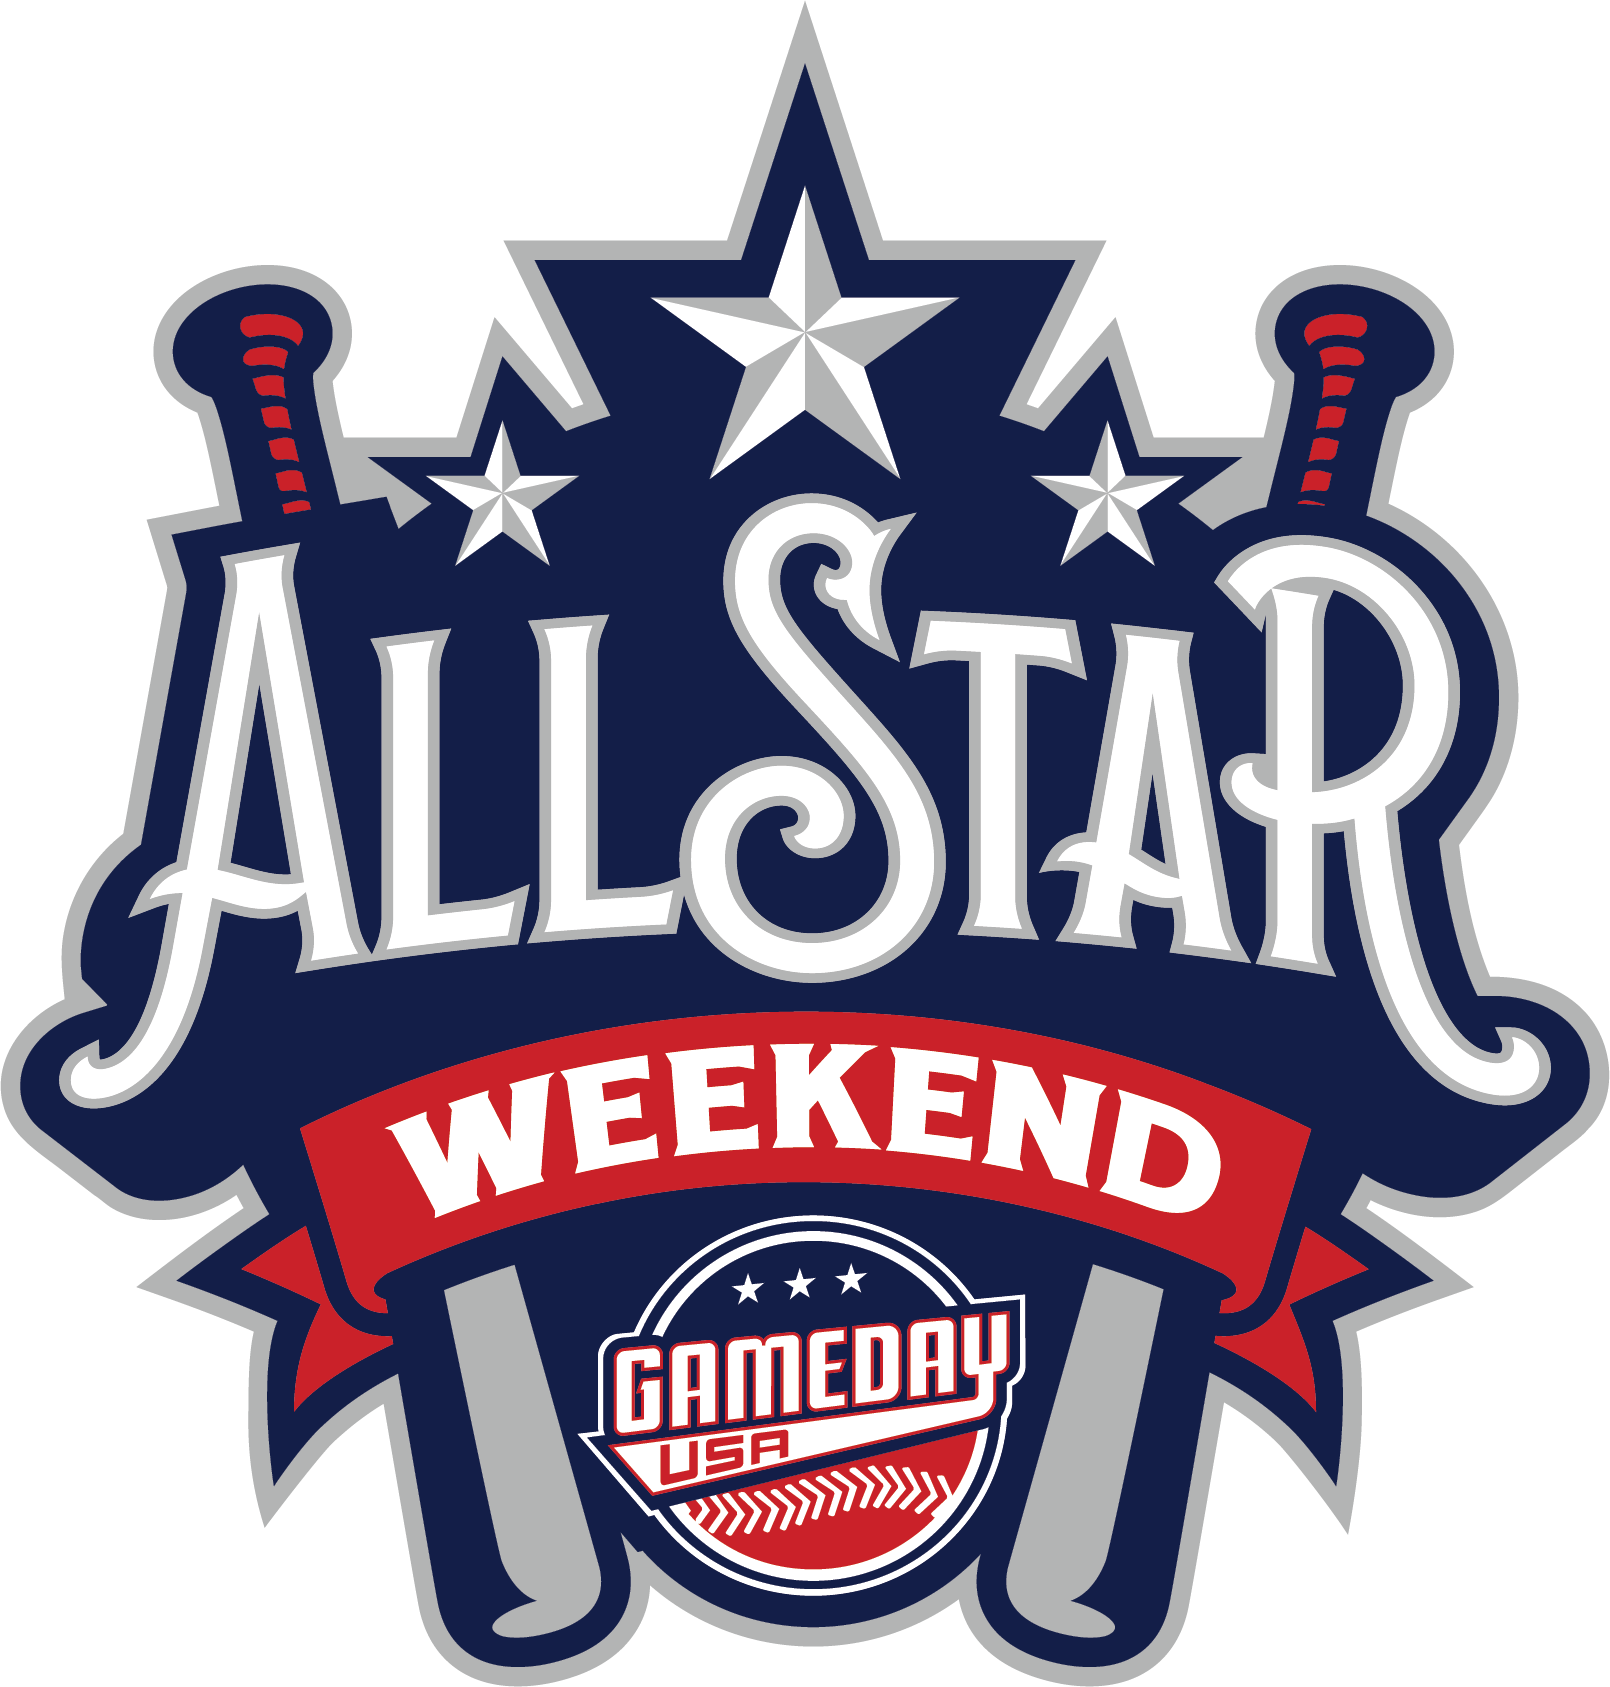 ALL-STAR WEEKEND - CHICAGO AREA